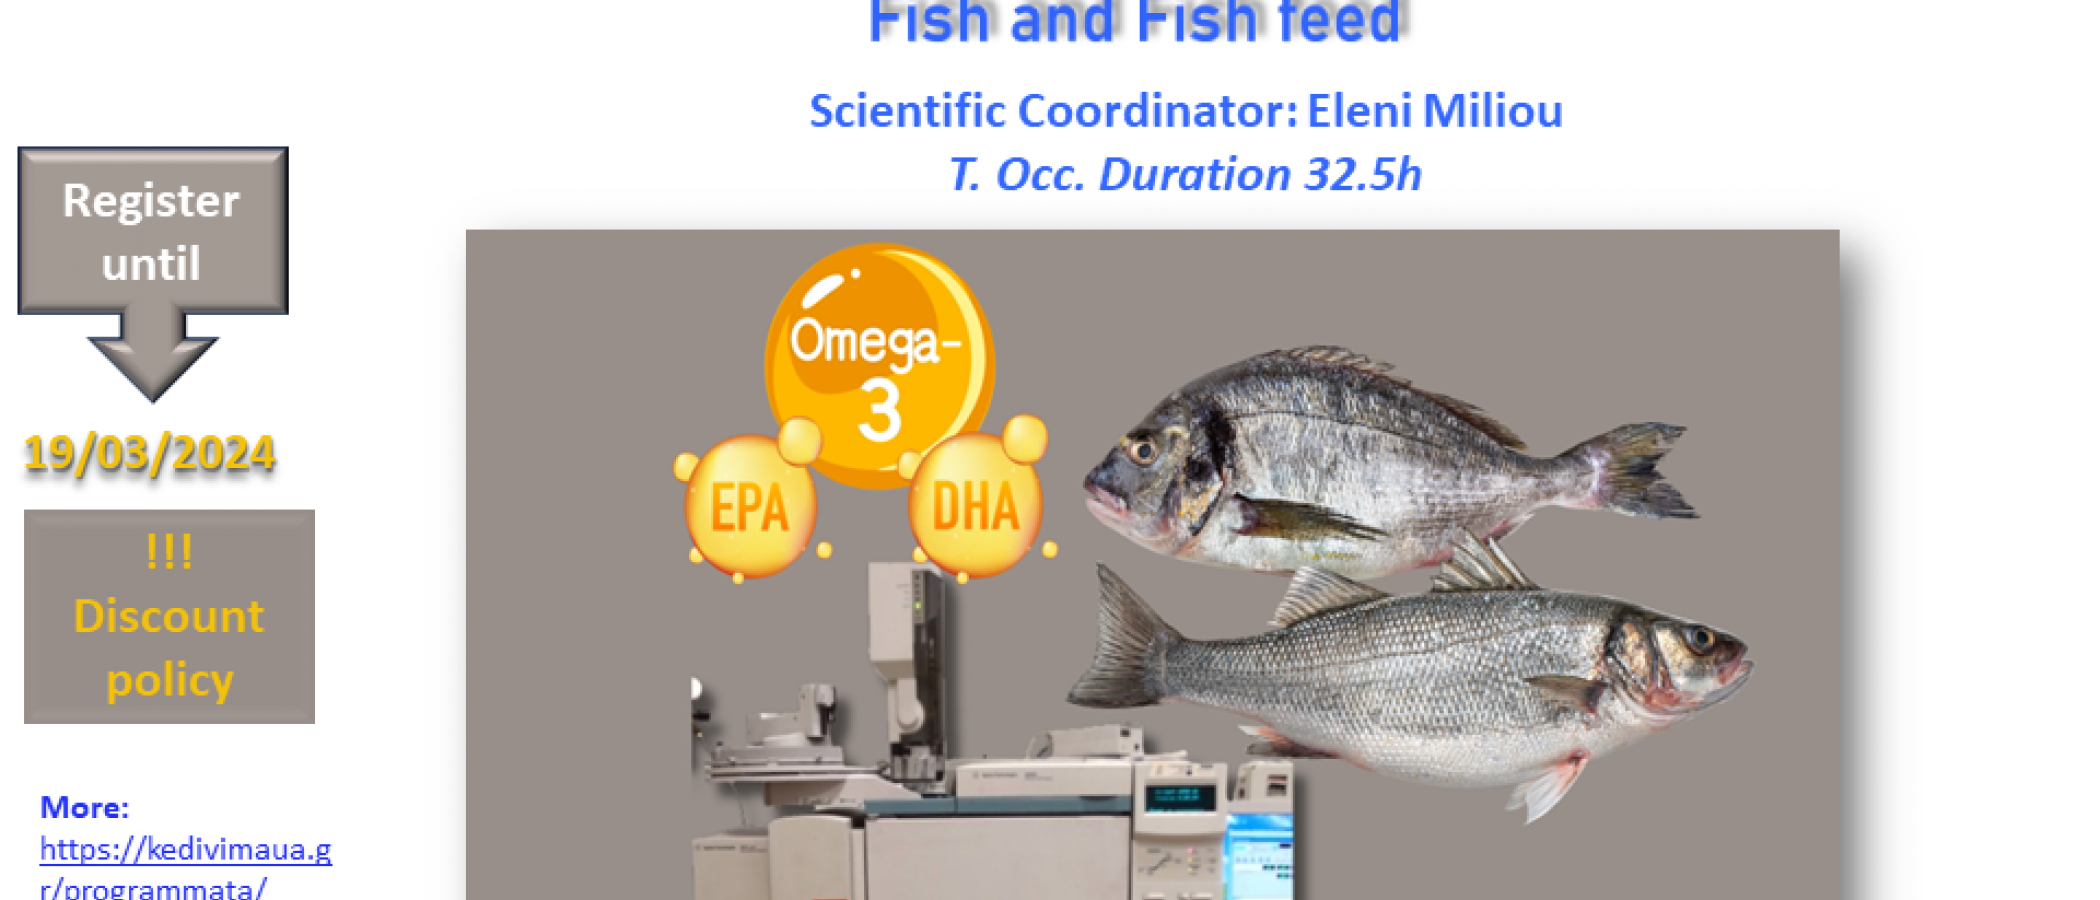 Application of gas chromatography for the determination of fatty acids in fish and fish feed